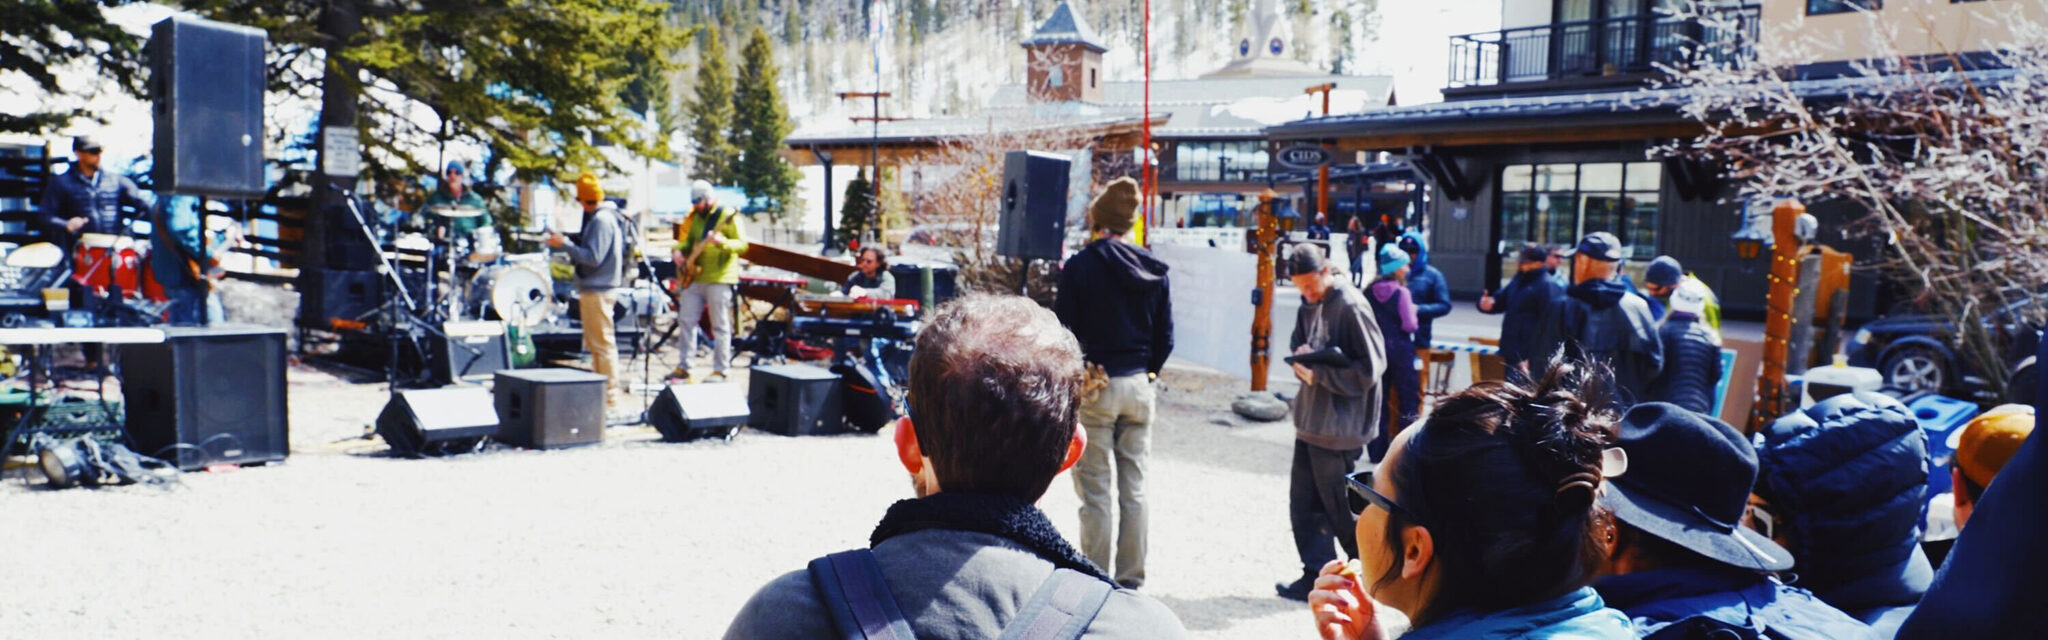 A crowd of people eat and watch a band playing an outdoor show in winter, with ski slopes behind them.